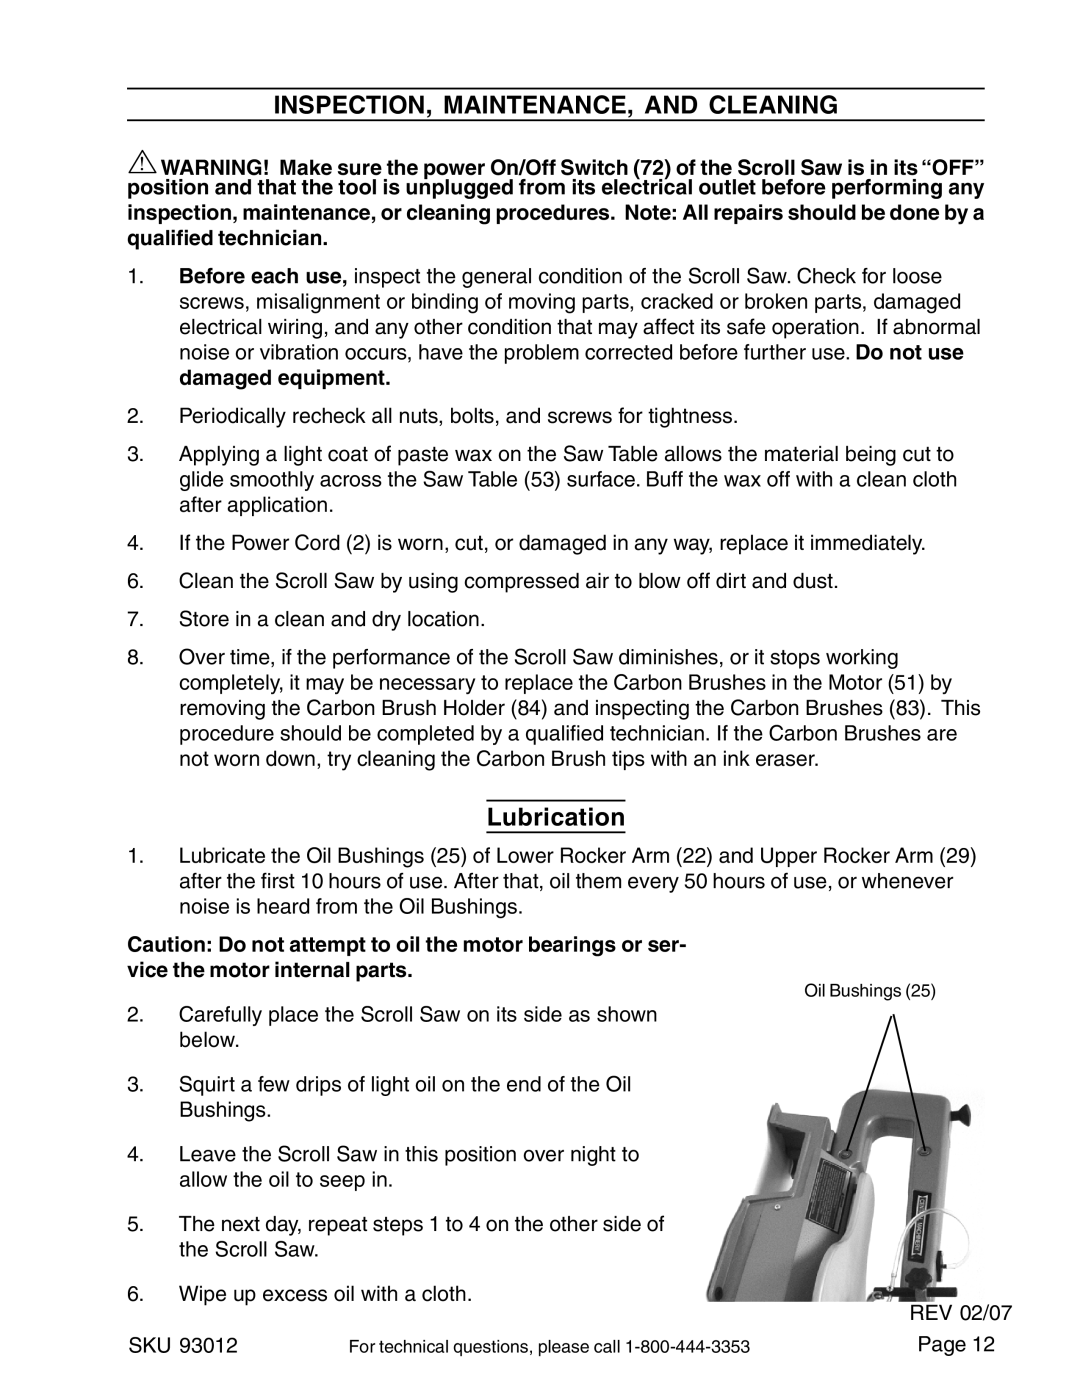 Harbor Freight Tools 93012 operating instructions Inspection, Maintenance, And Cleaning, Lubrication 